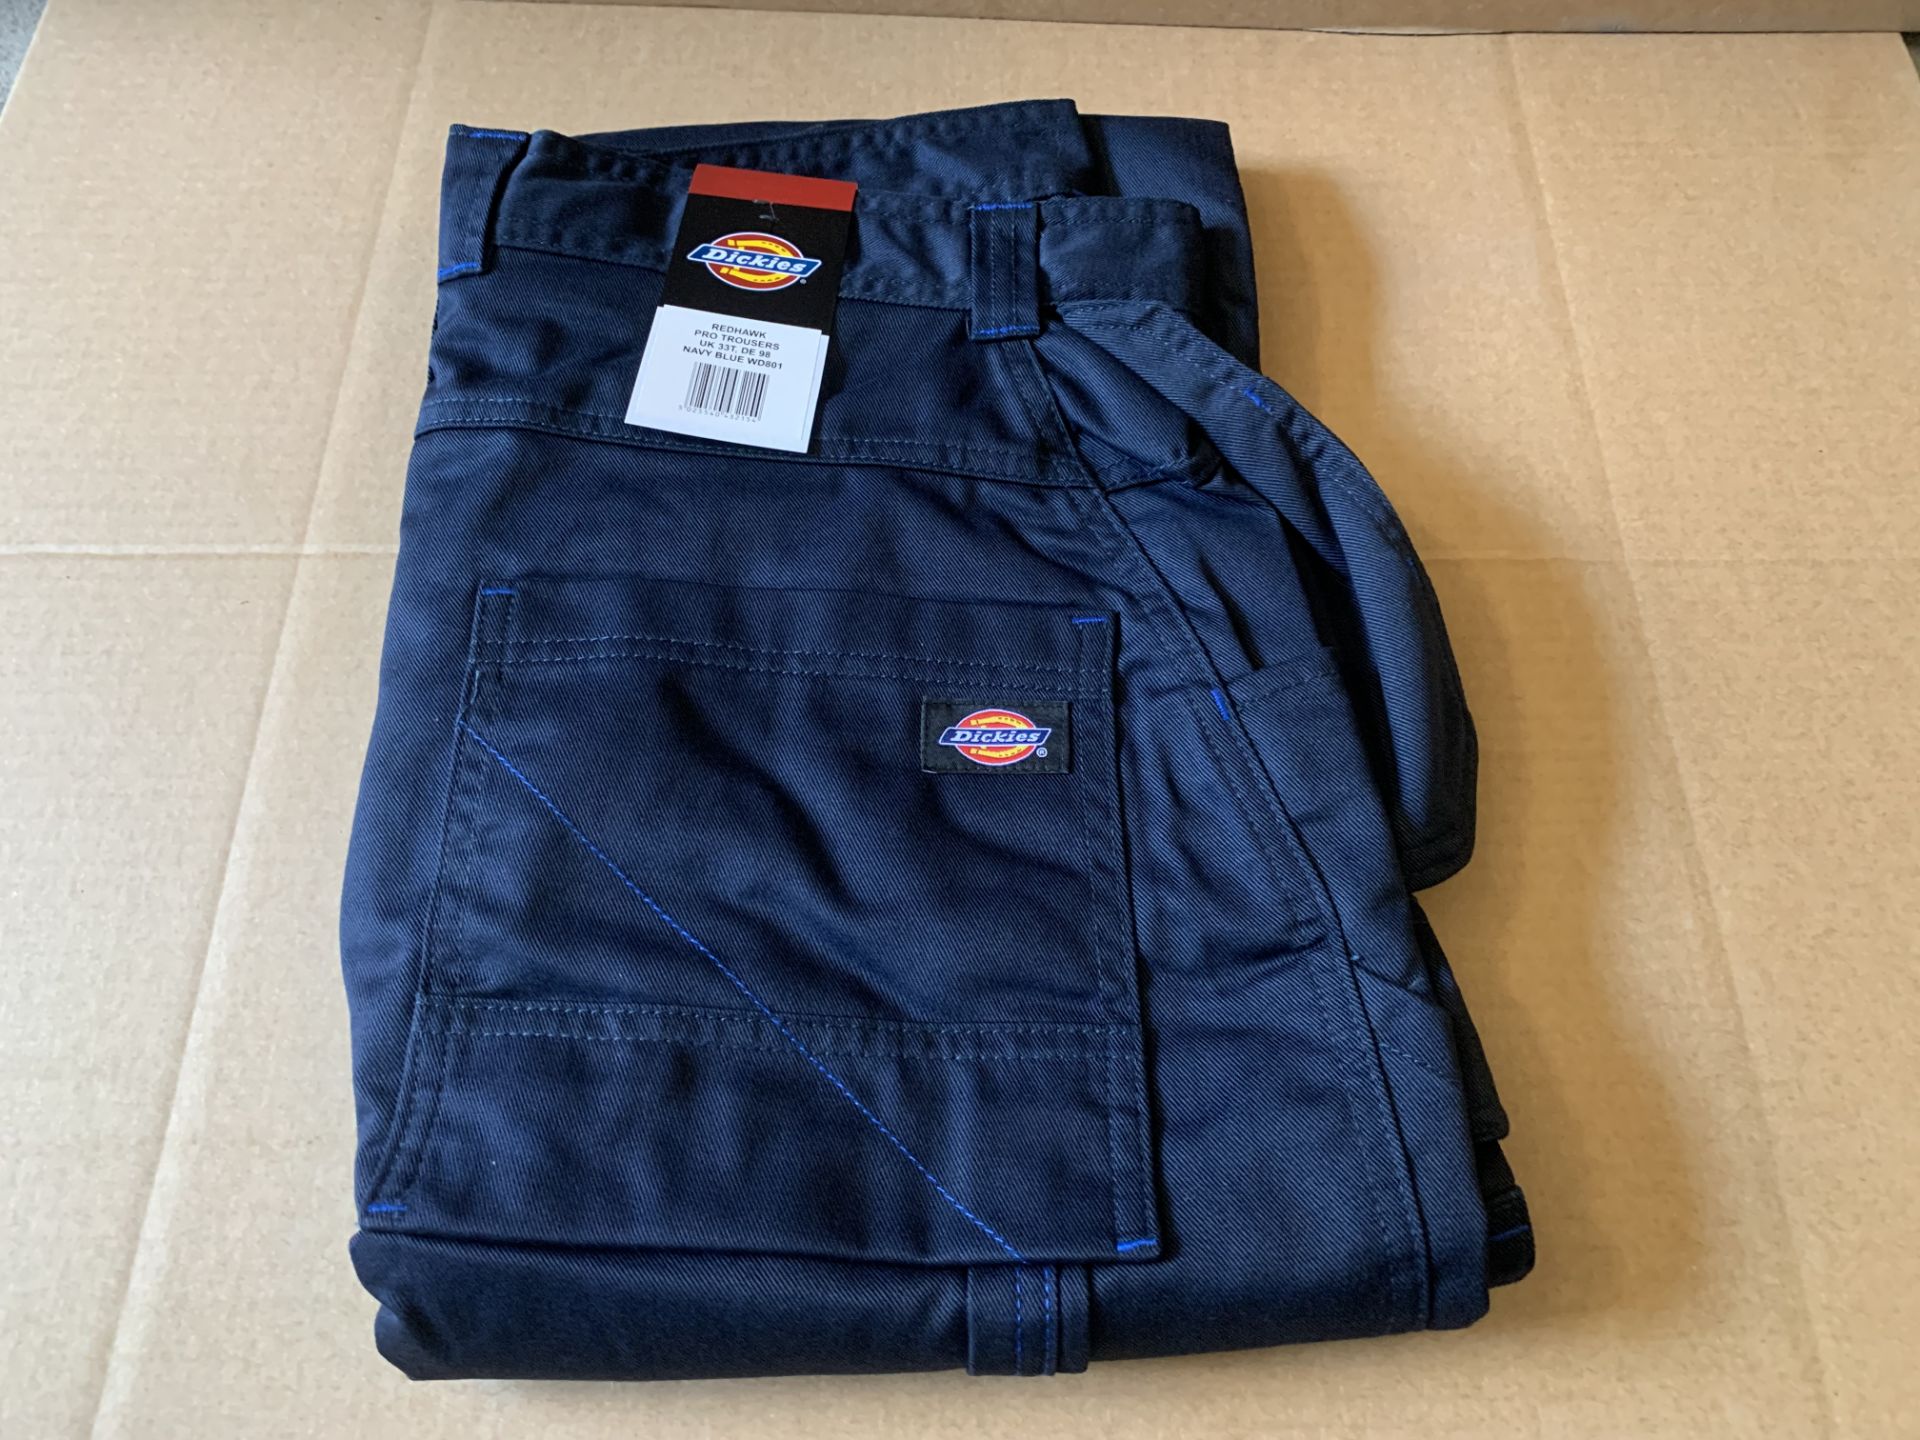 4 X BRAND NEW DICKIES REDHAWK PRO TROUSERS NAVY BLUE SIZE 33